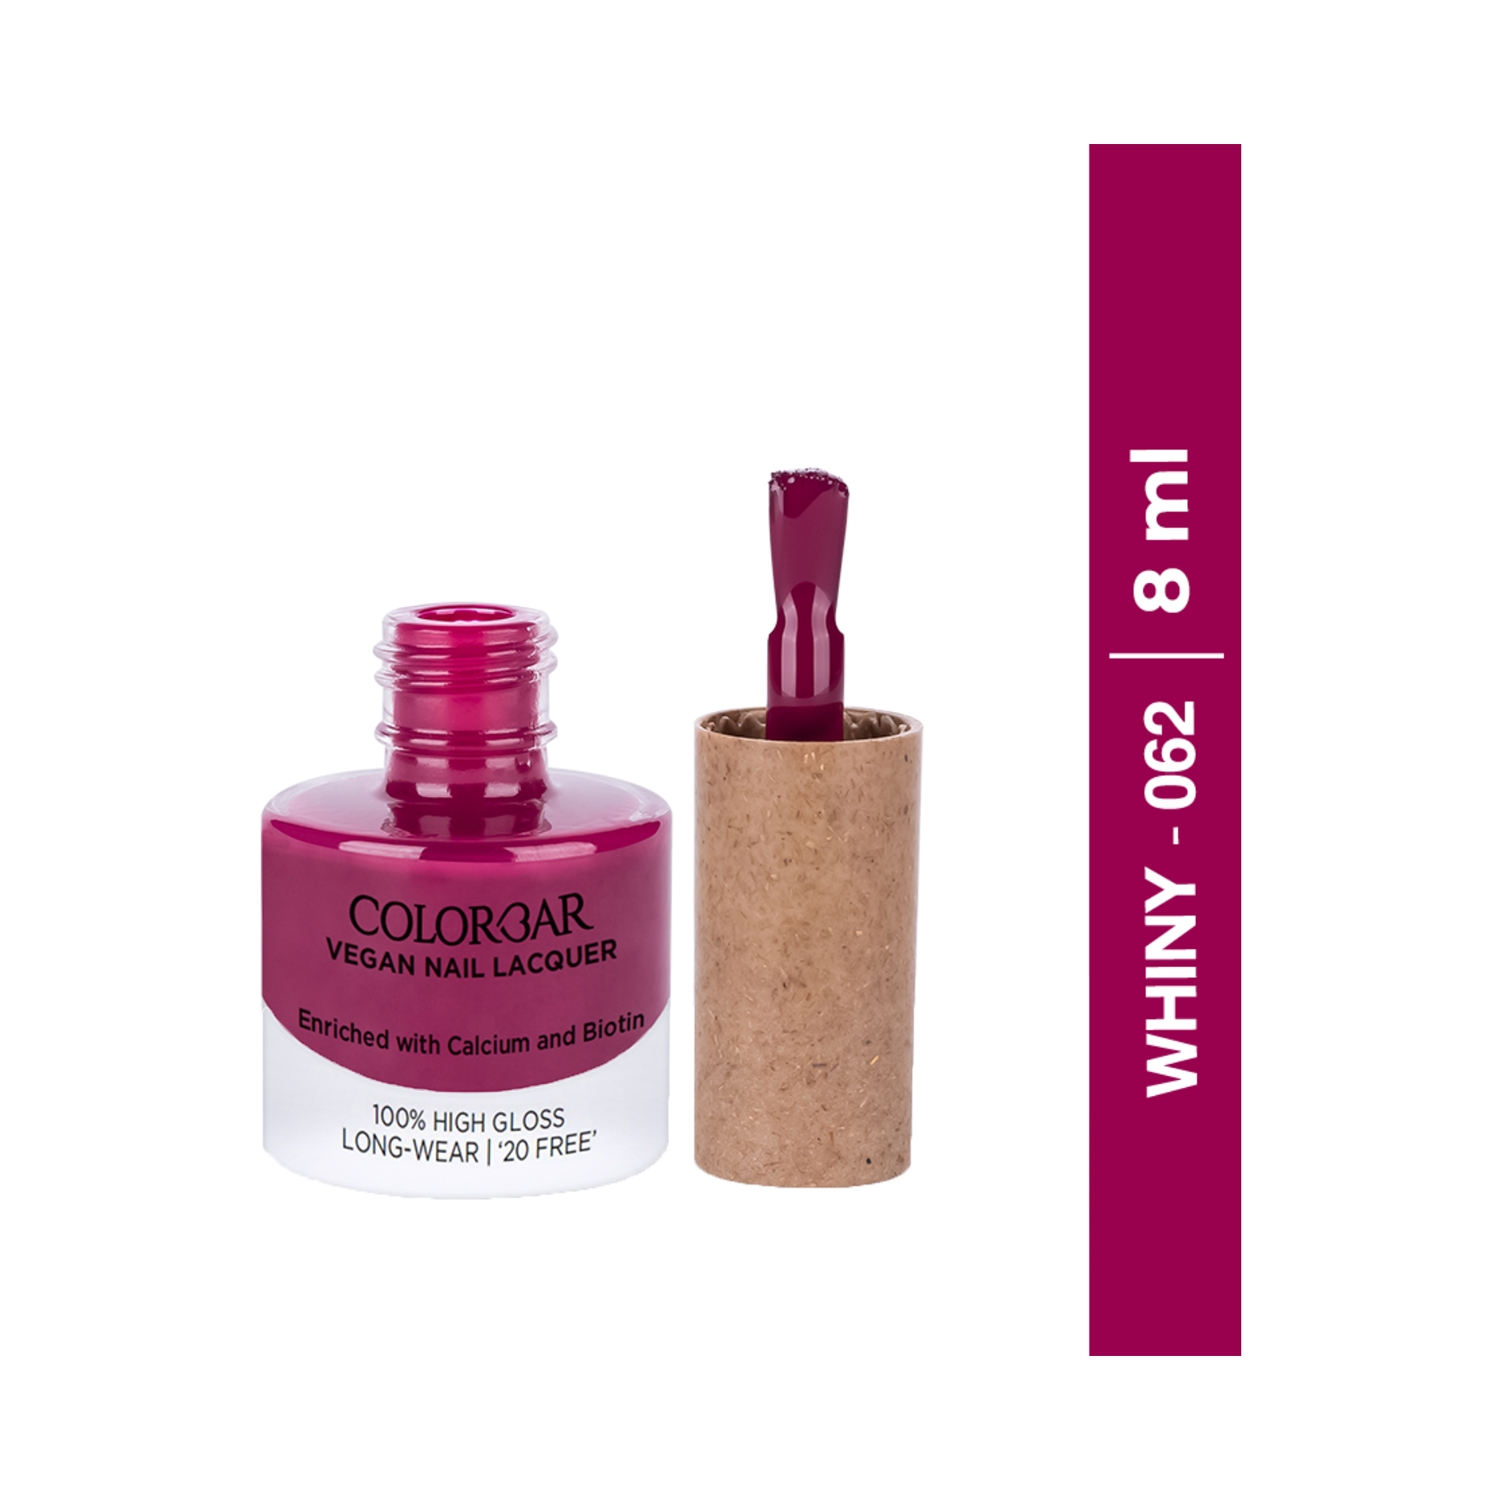 Colorbar | Colorbar Vegan Nail Lacquer - 062 Whiny (8ml)